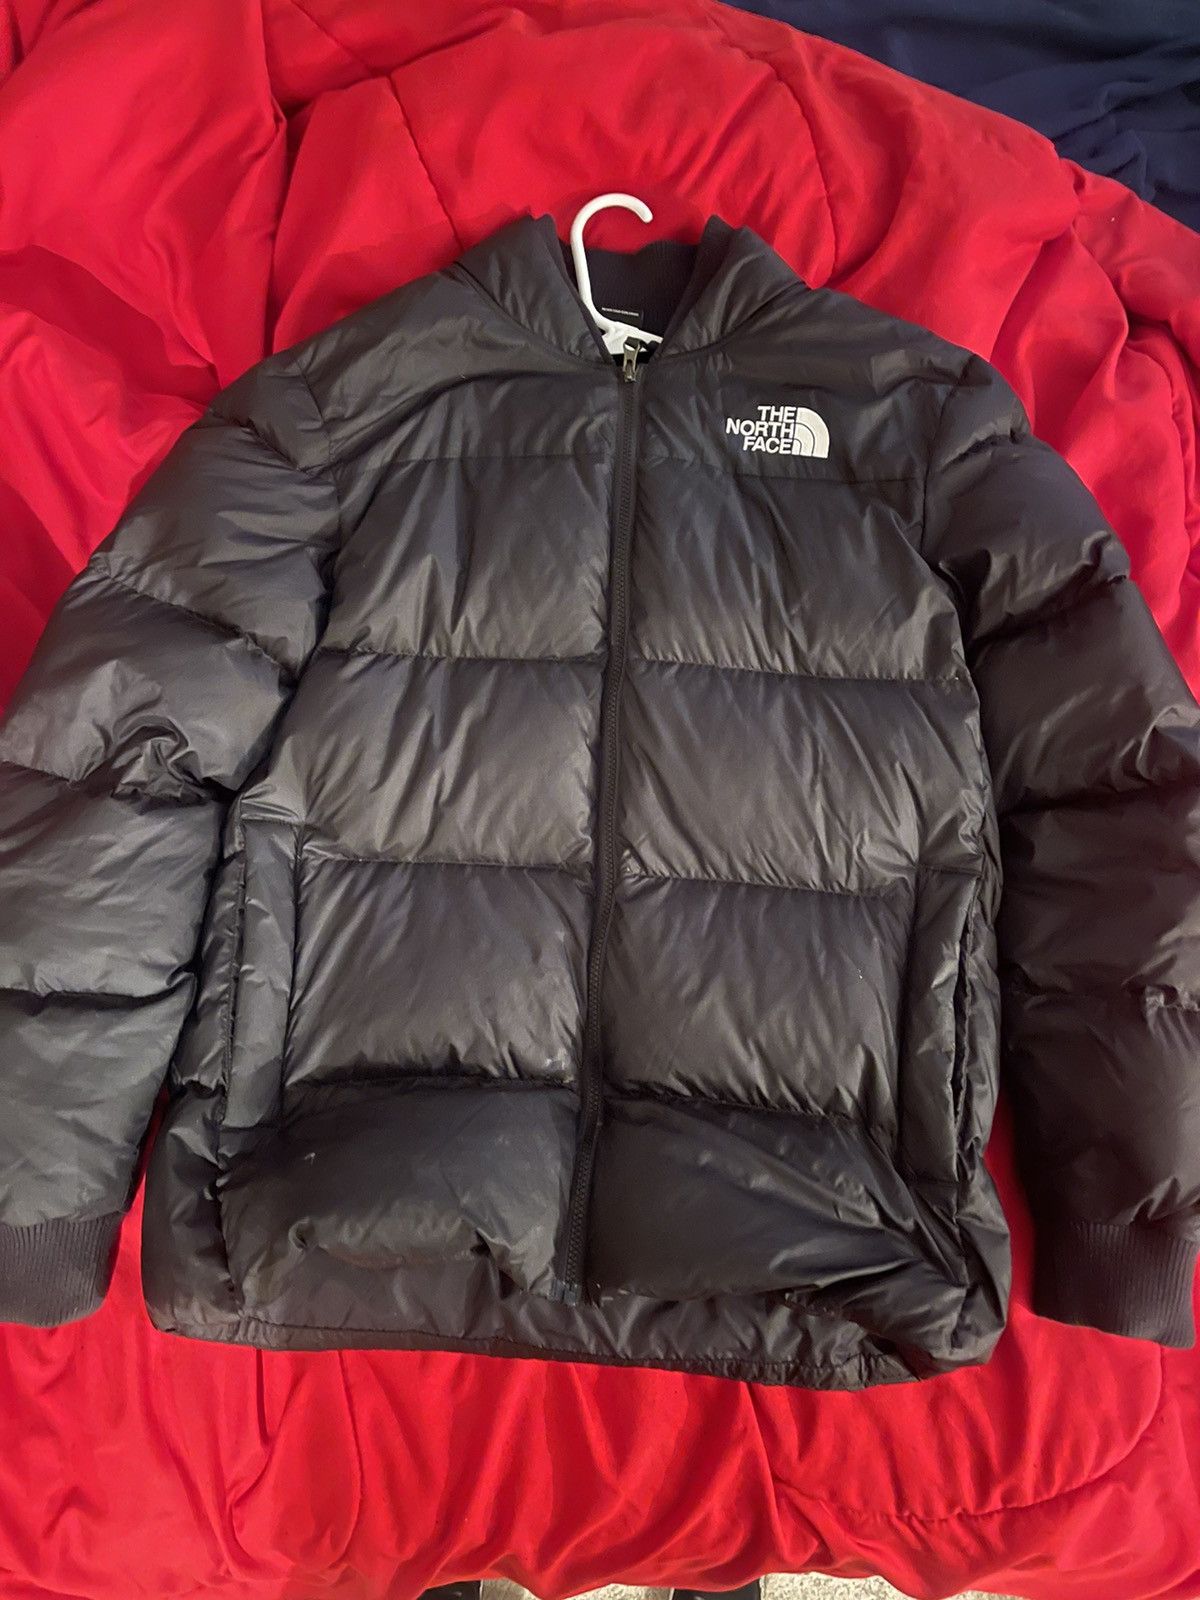 The North Face The North Face Puffer Jacket | Grailed